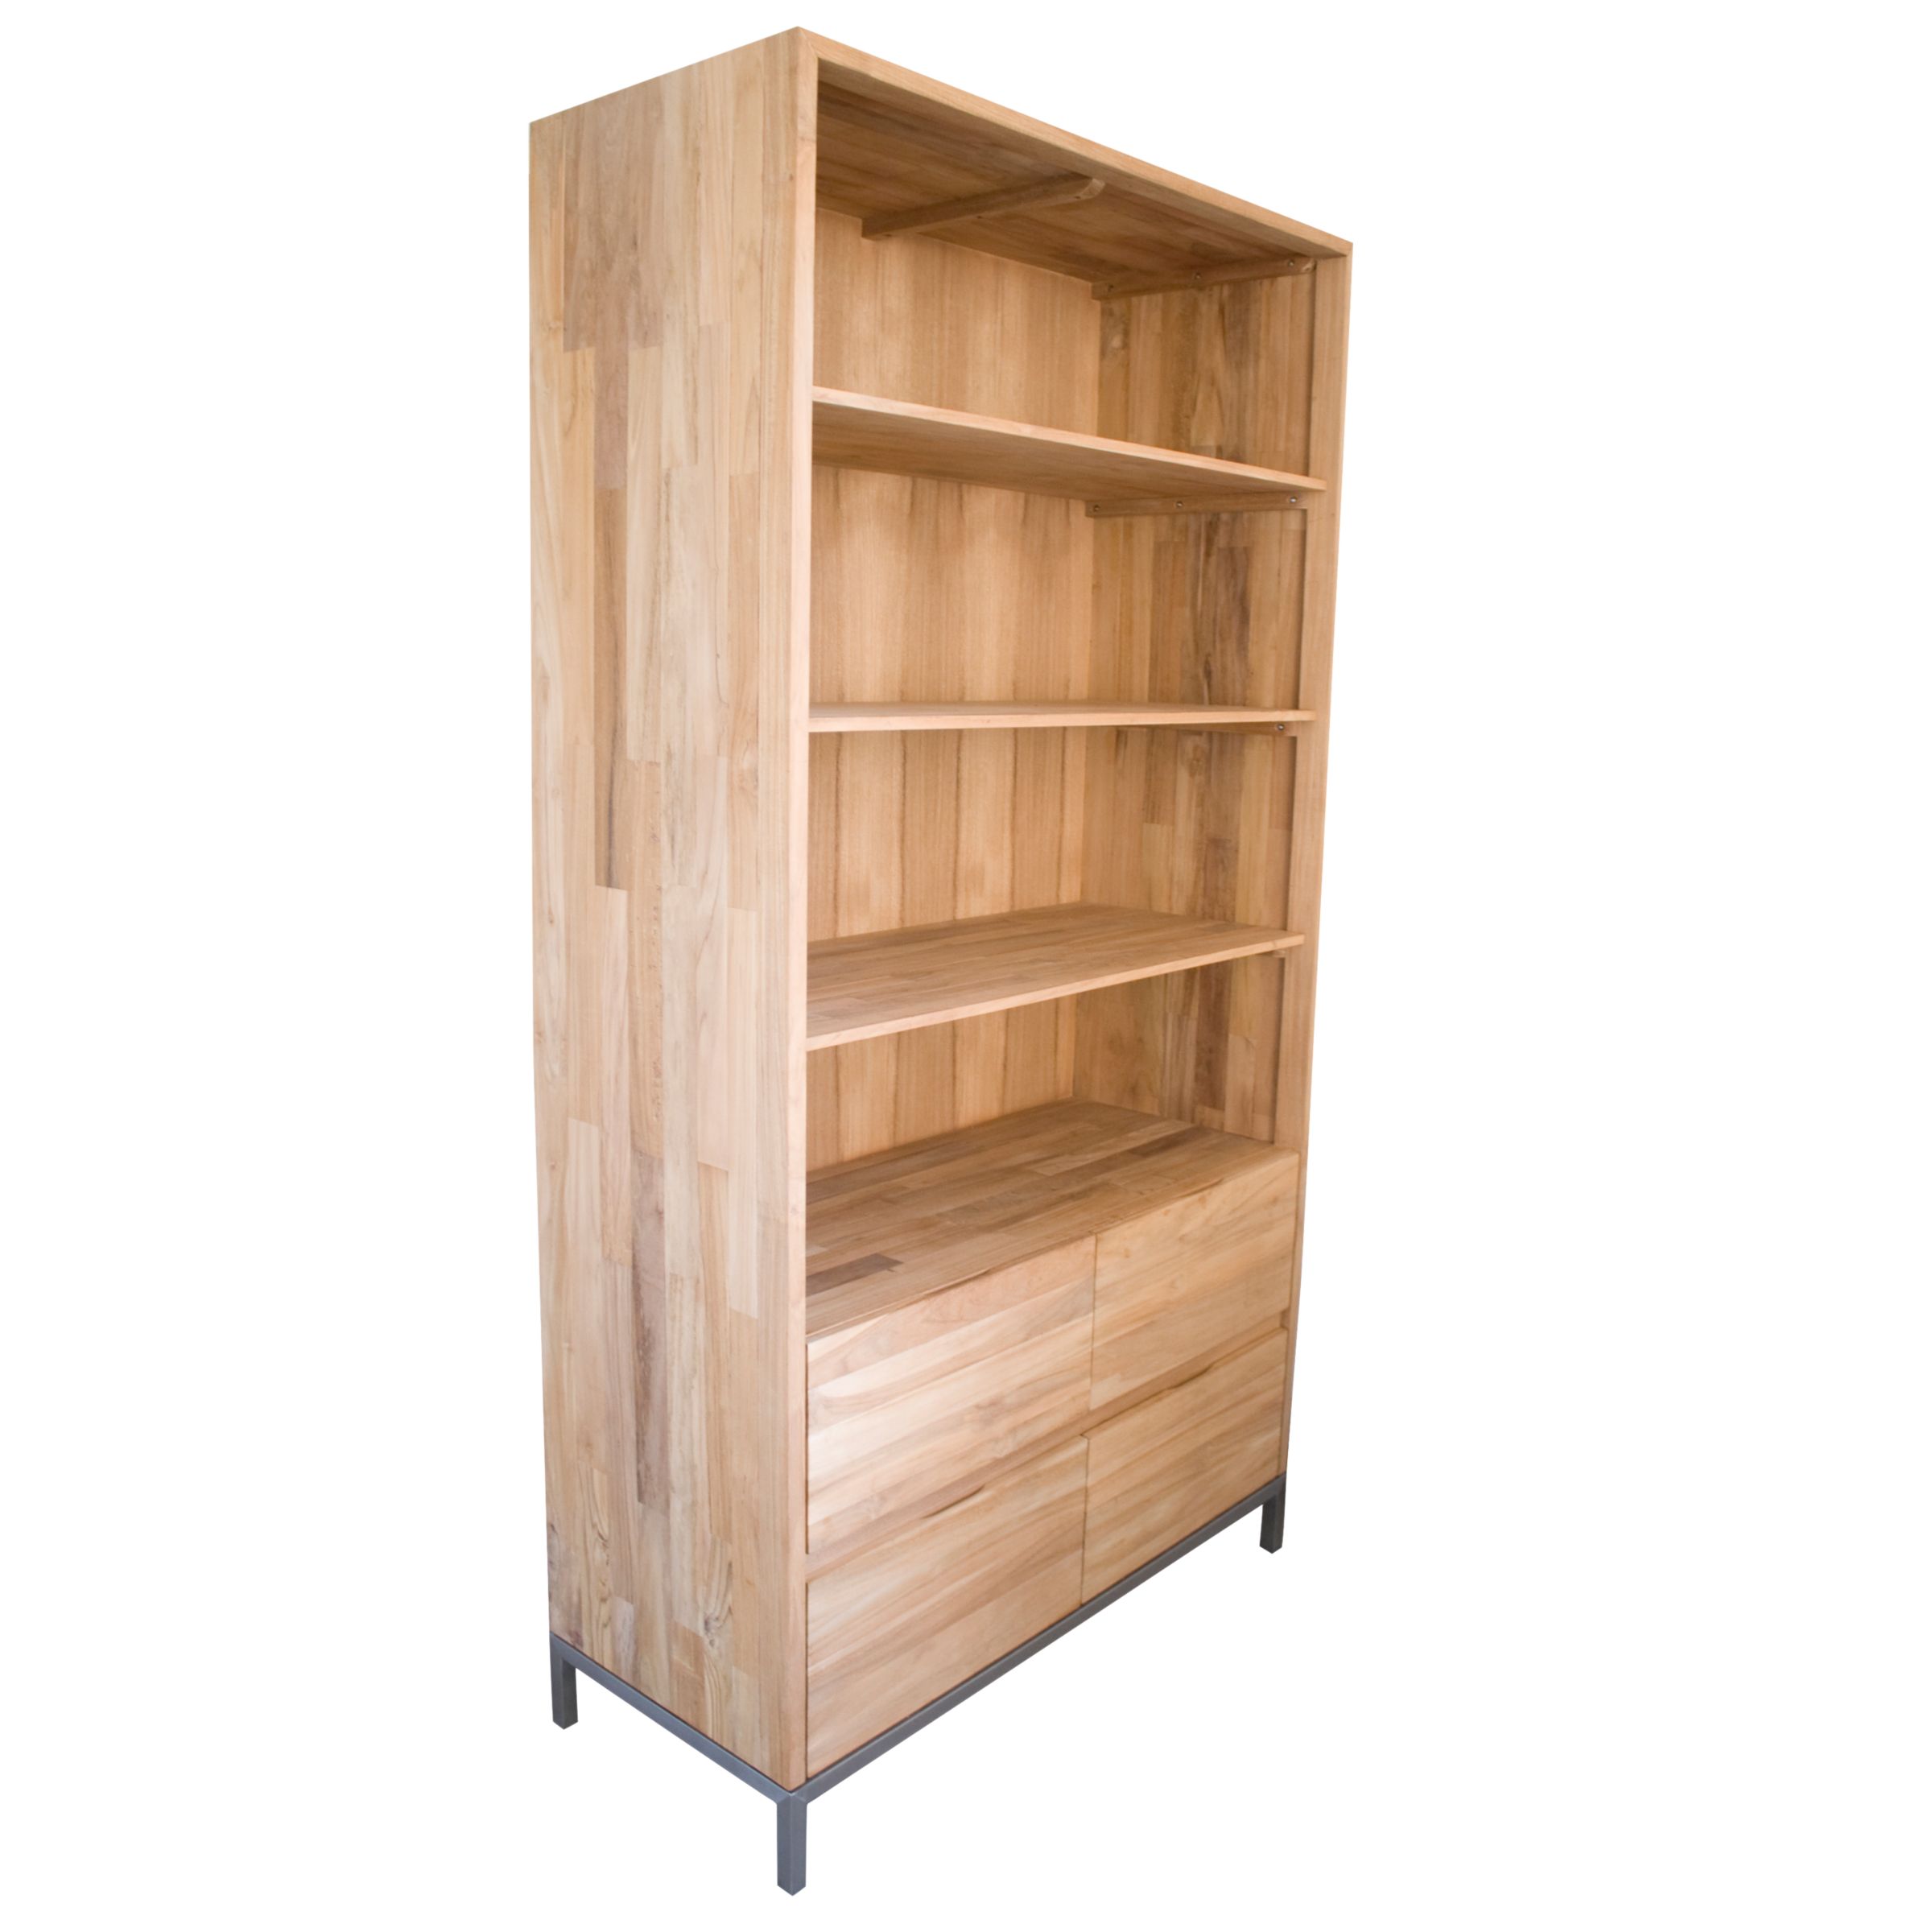 John Lewis Teakery Double Bookcase with 2 Drawers